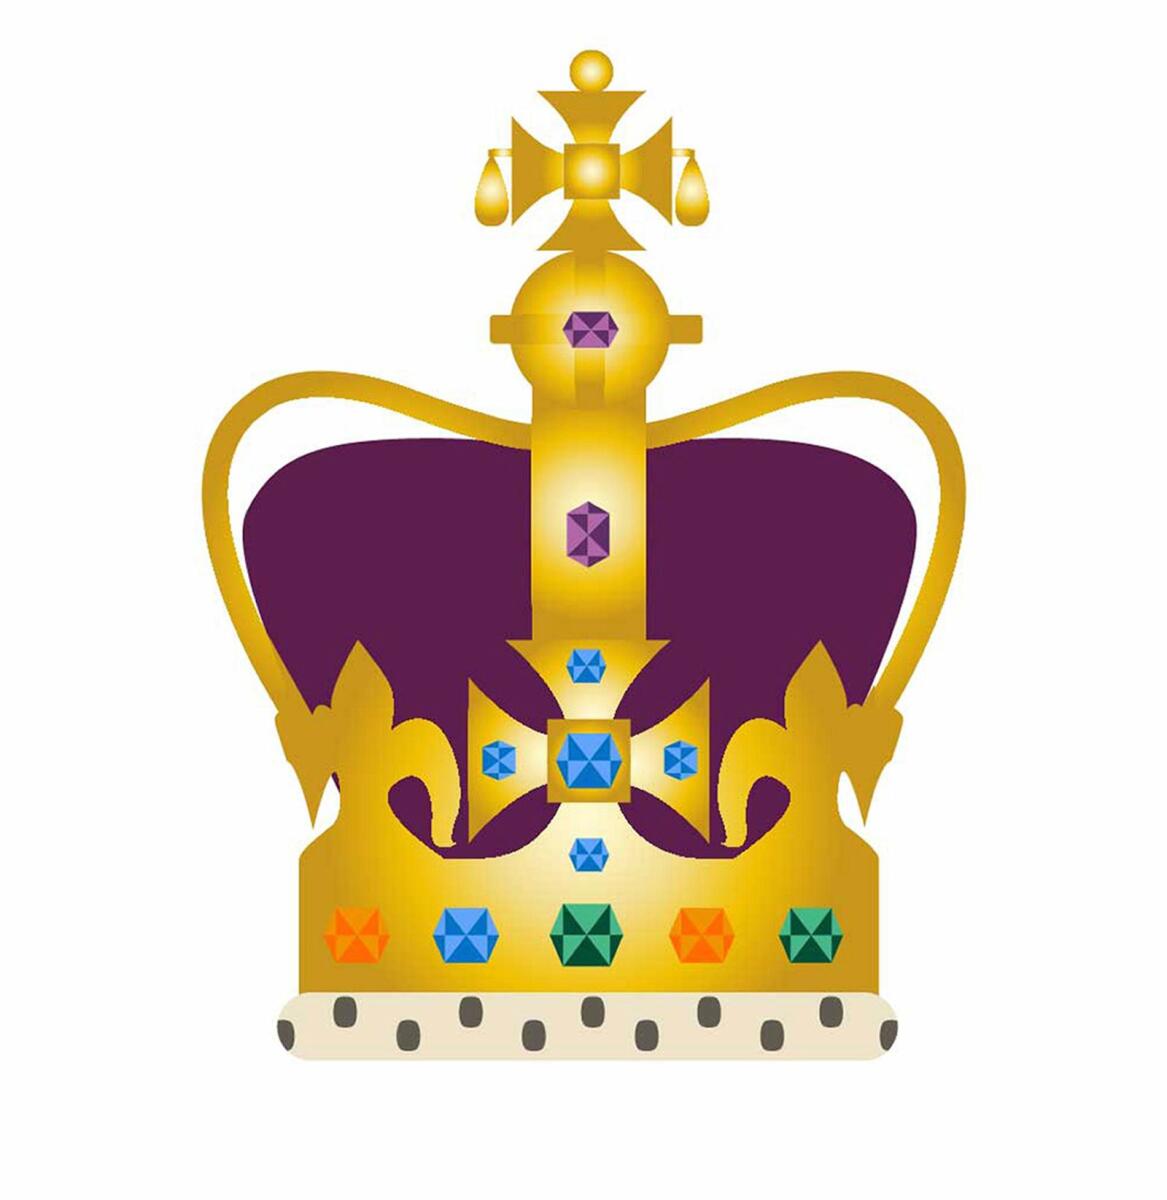 This image issued on Sunday by Buckingham Palace shows a new emoji to mark the Coronation of King Charles III. The colourful cartoon motif depicts the 17th century jewelled solid gold St Edward’s Crown with purple velvet cap – the regalia which will be used to crown the King on May 6. -- AP